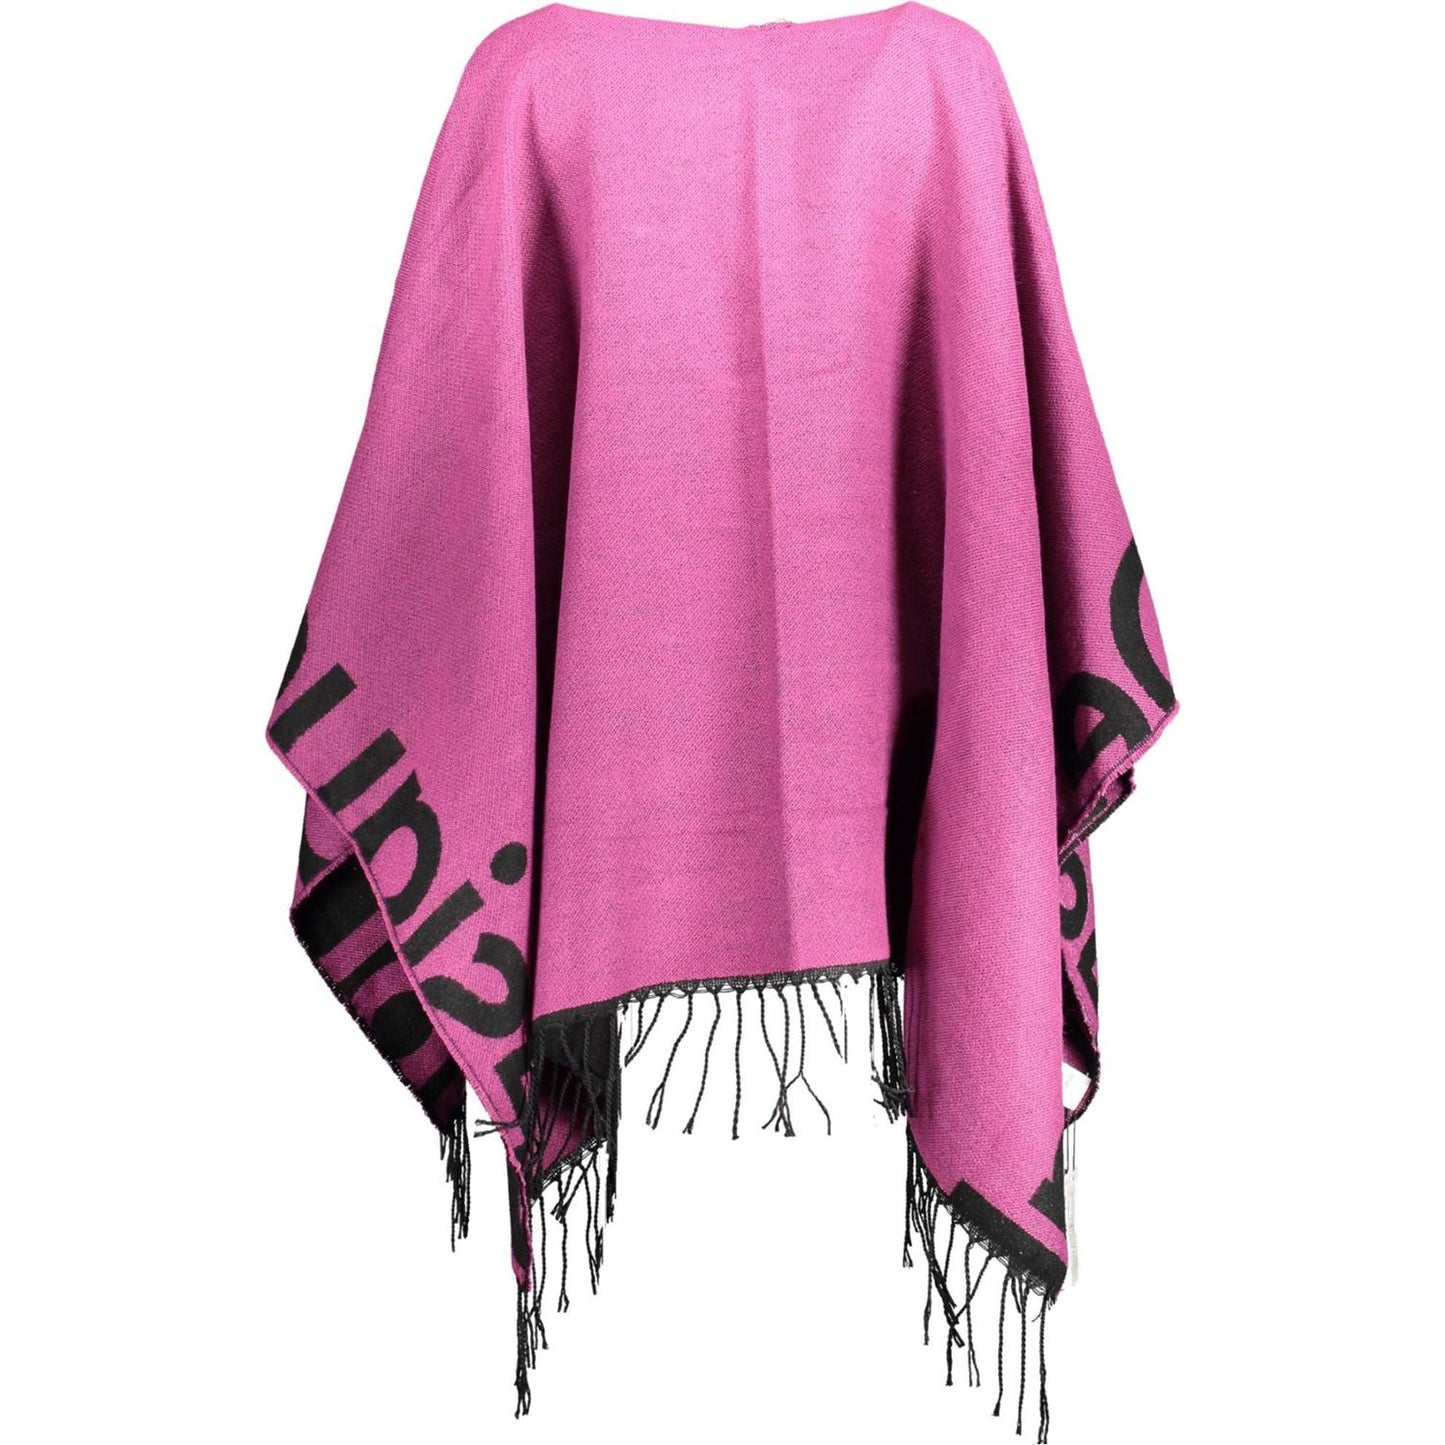 Desigual Chic Purple Poncho with Contrasting Details chic-purple-poncho-with-contrasting-details